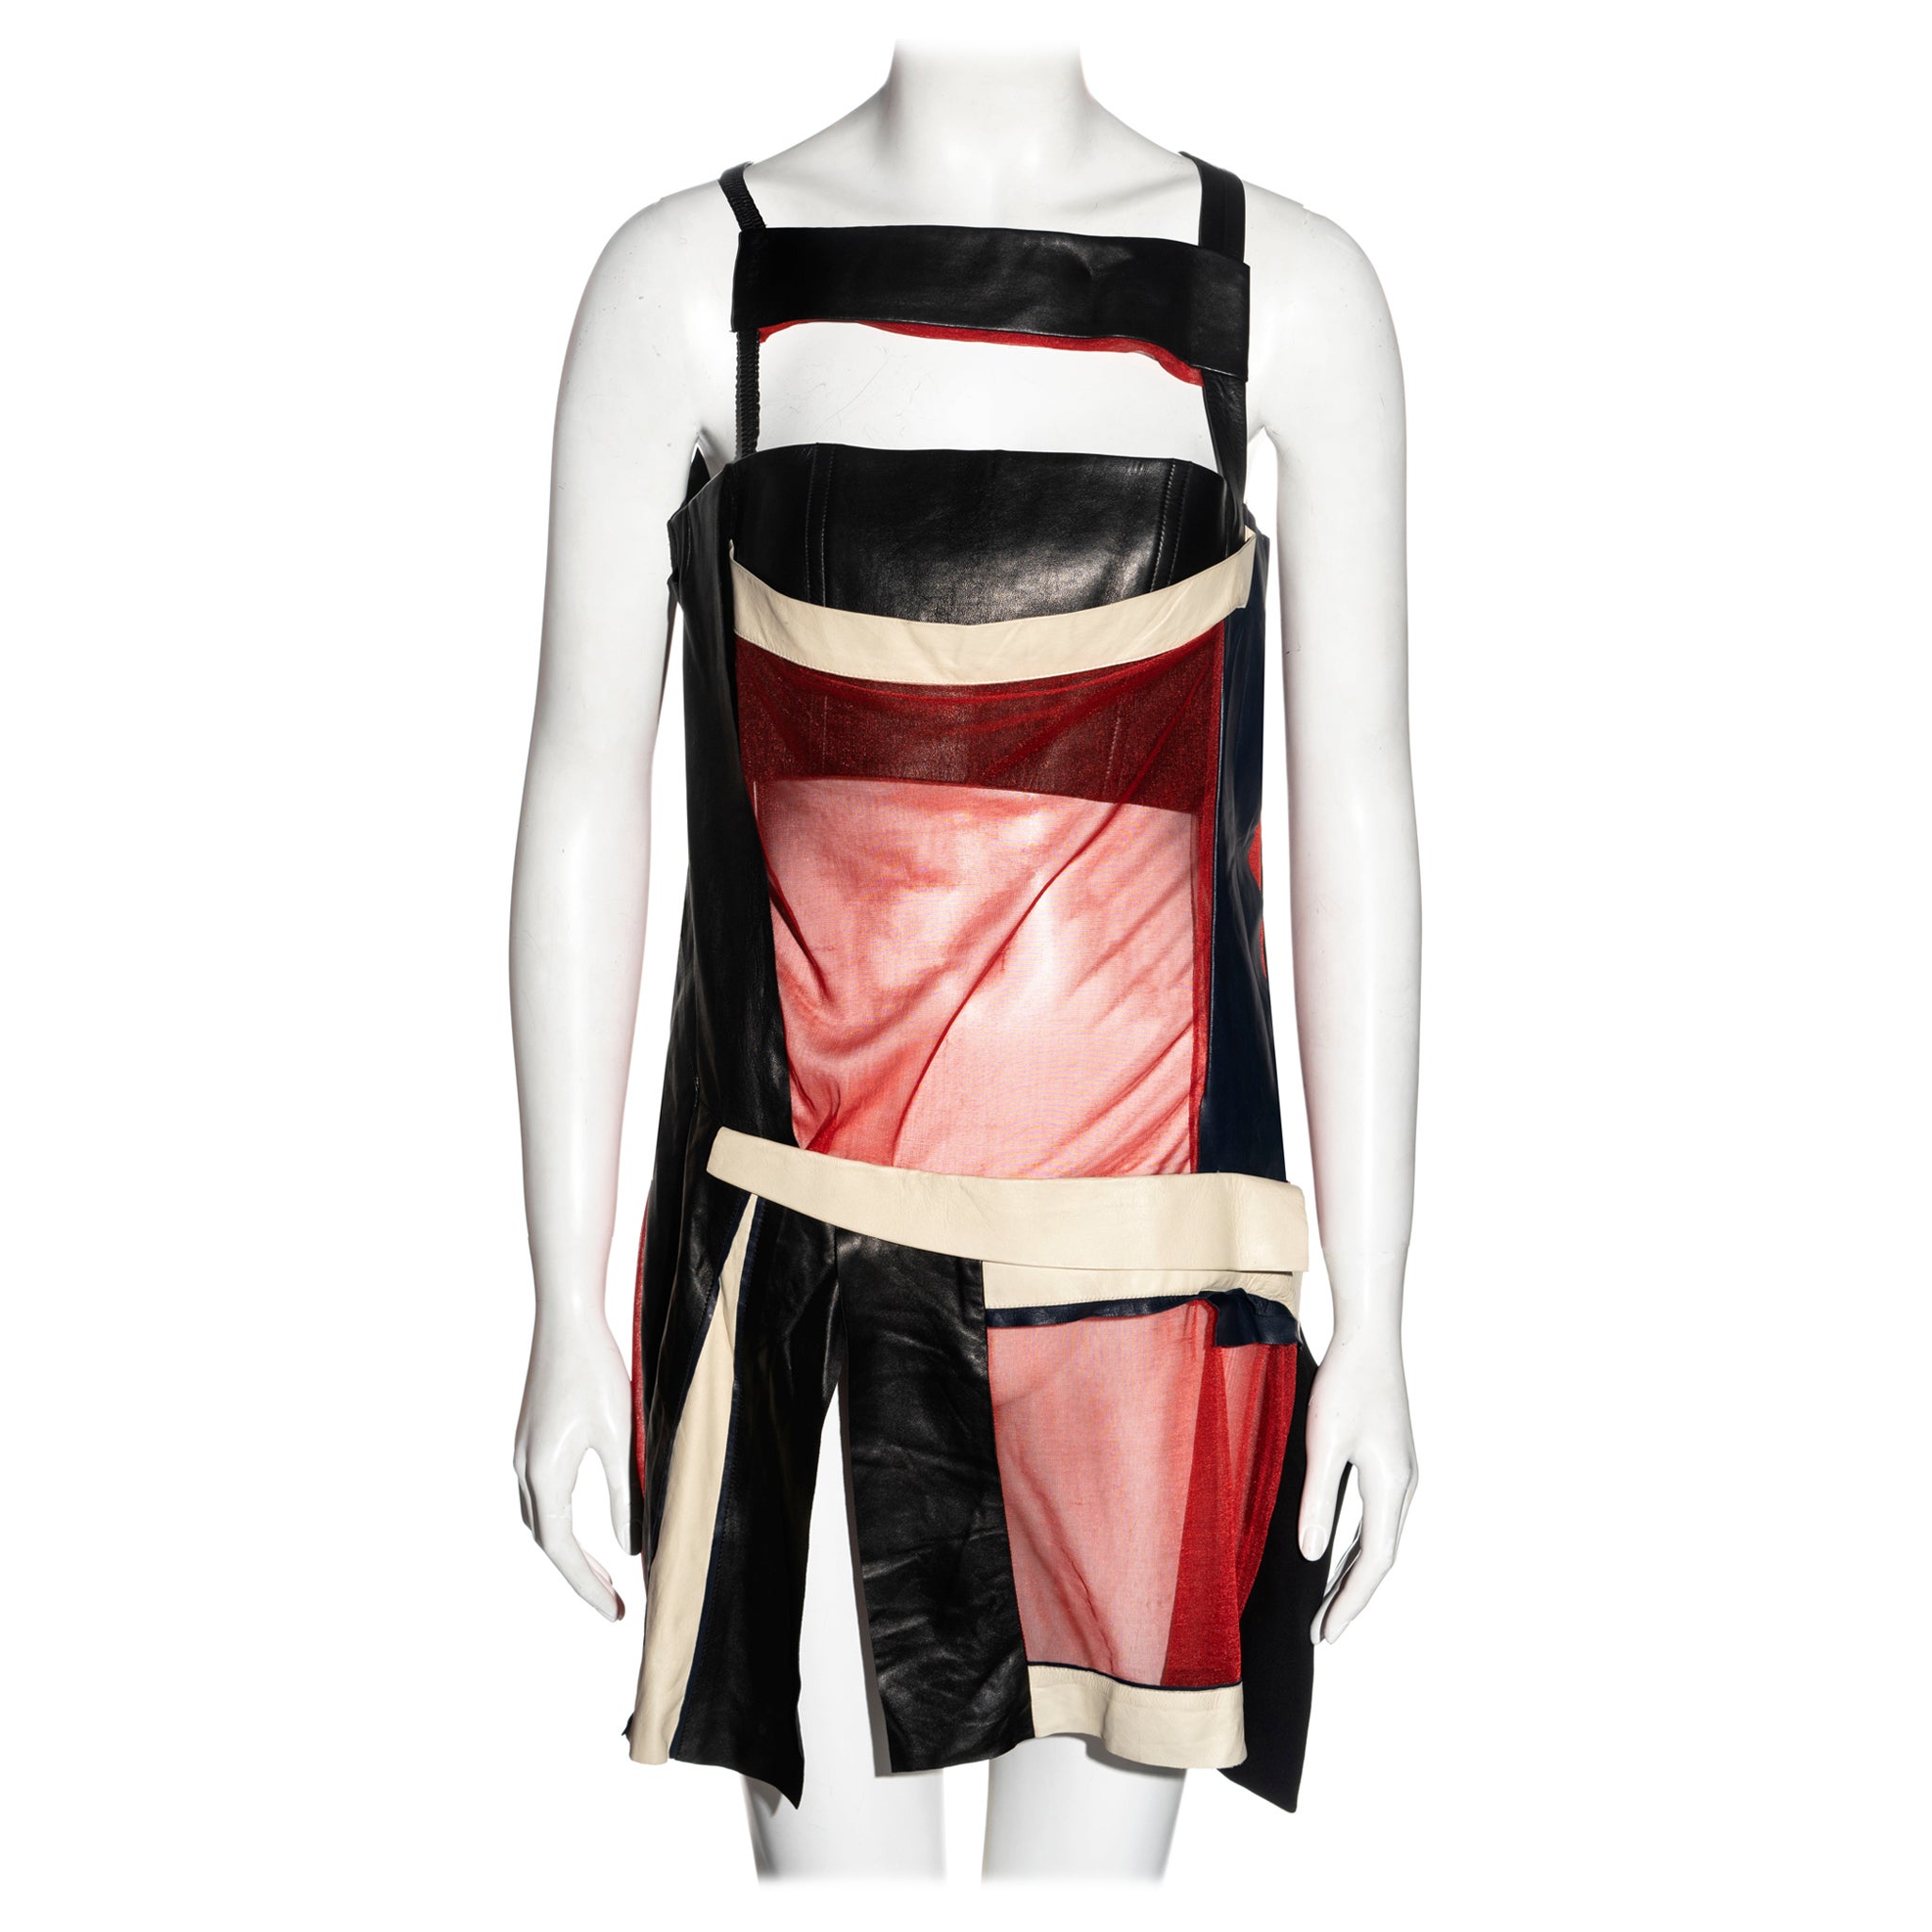 Balenciaga by Nicolas Ghesquière black and red leather mini dress, ss 2010 For Sale